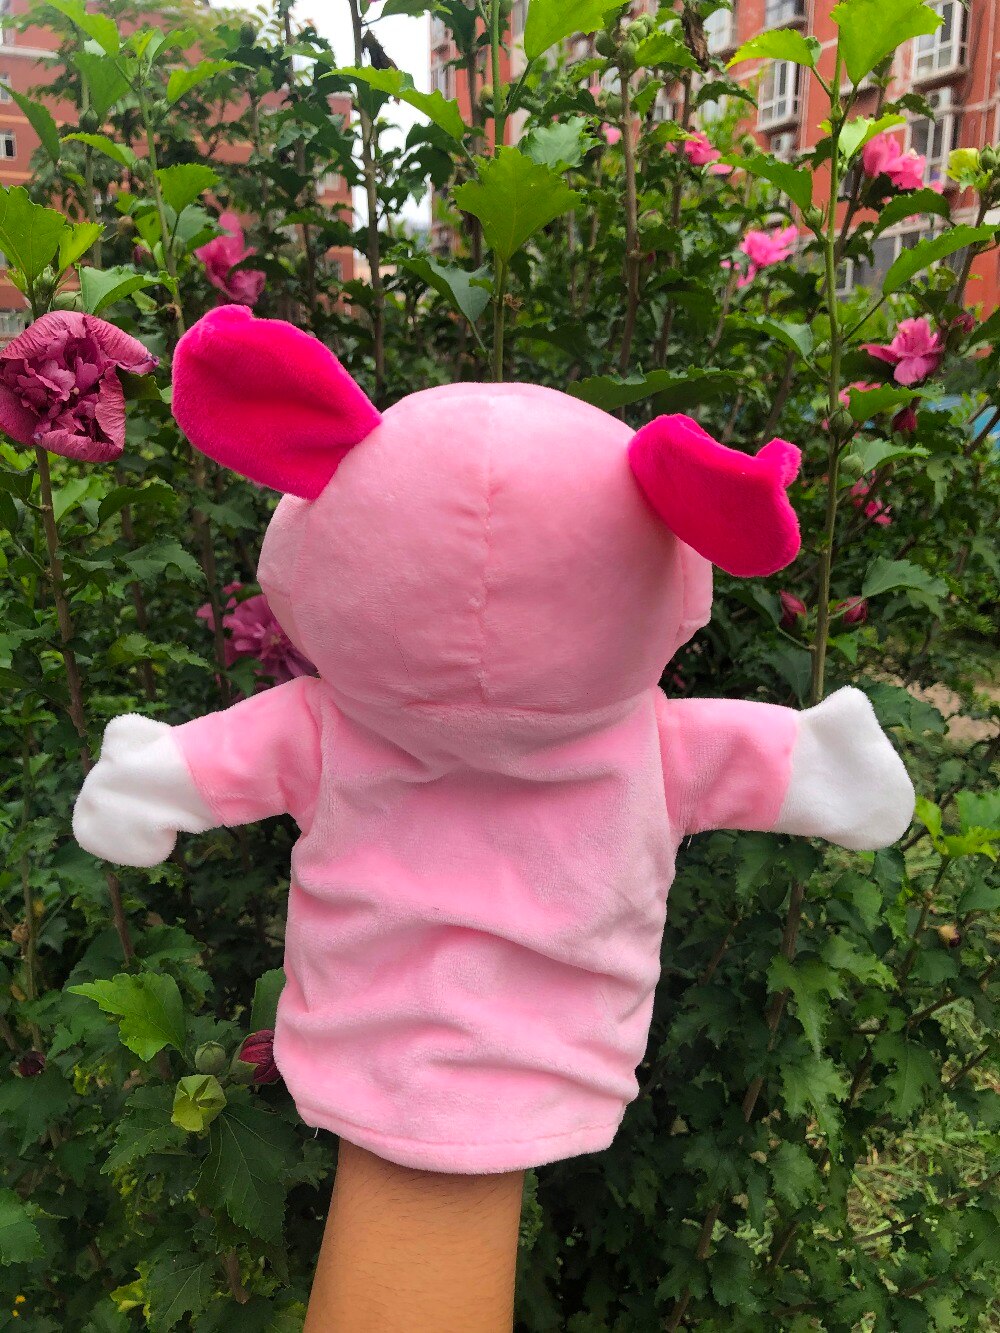 Animal Lovely Pink Pig Hand Puppet Soft Plush Baby Funny Kids Strange Child Educational Gentle Doll Plush Toy Warmth Property